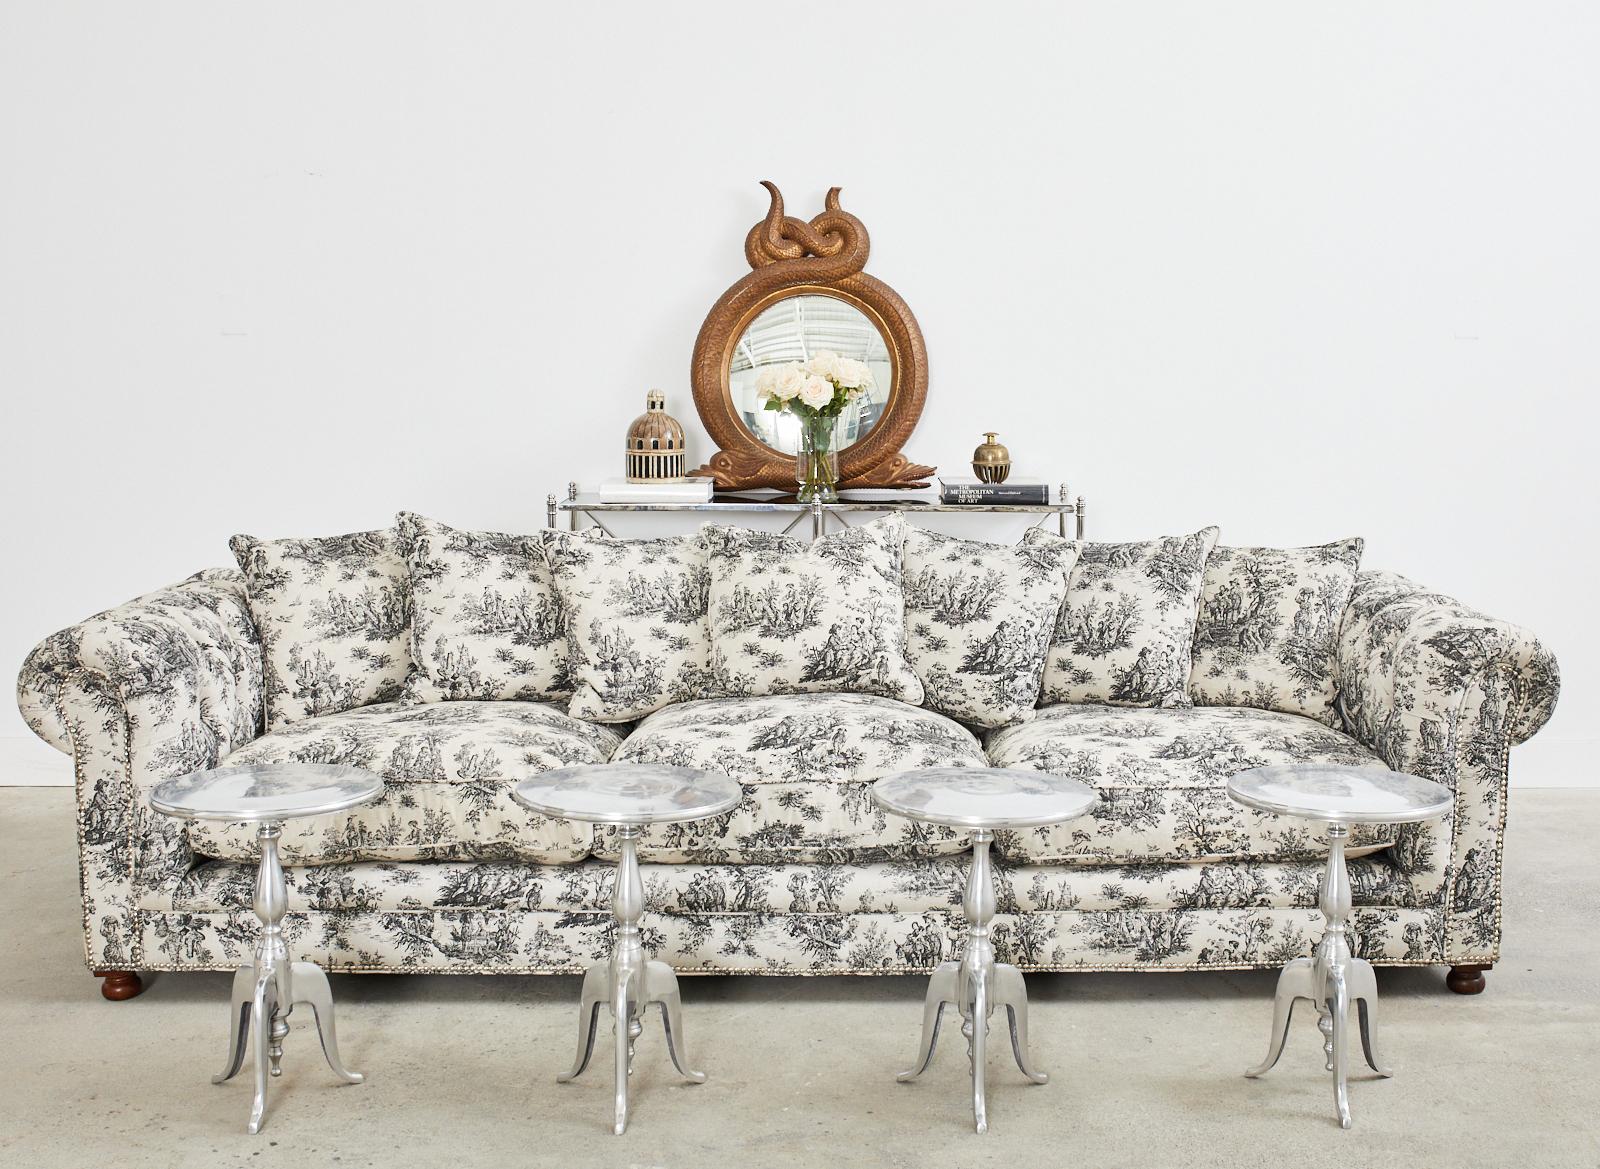 Monumental Grande Dame tufted sofa featuring a toile de jouy French provincial style fabric upholstery. Designed by Christian Audigier (French 1958-2015) for his home in Hollywood, CA. Measuring nearly 10 feet long with a hardwood frame having